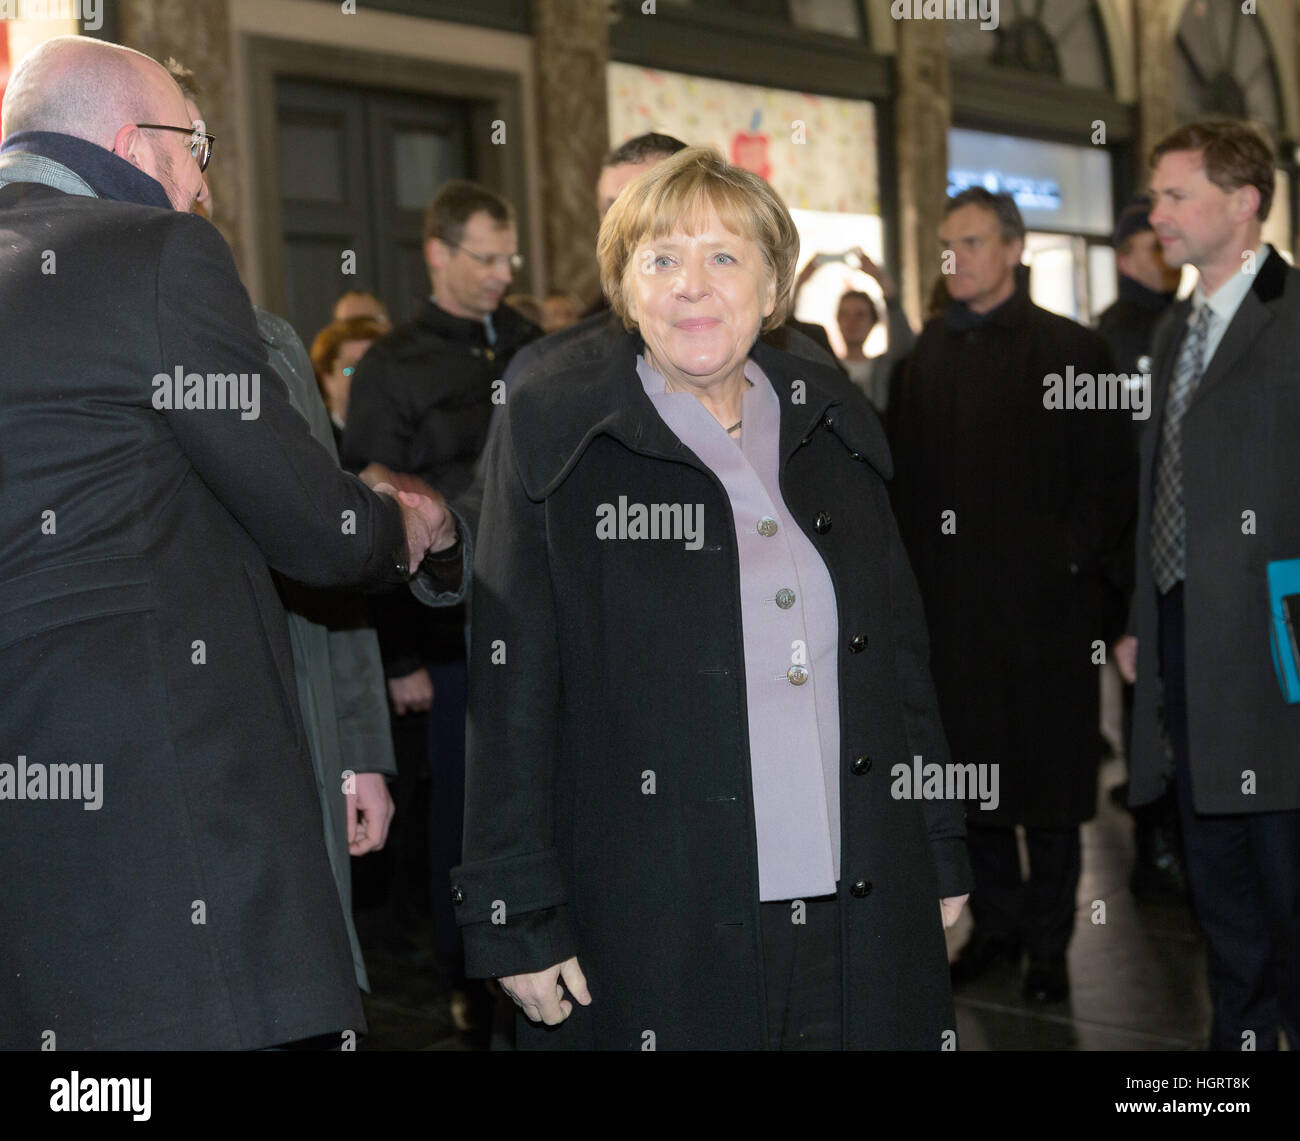 Brussels, Belgium. 12th Jan, 2017. The German Chancellor Angela Merkel (CDU) with the Belgian Prime Minister Charles Michel (L) in the Taverne du Passage in Brussels, Belgium, 12 January 2017. Photo: Thierry Monasse/dpa/Alamy Live News Stock Photo